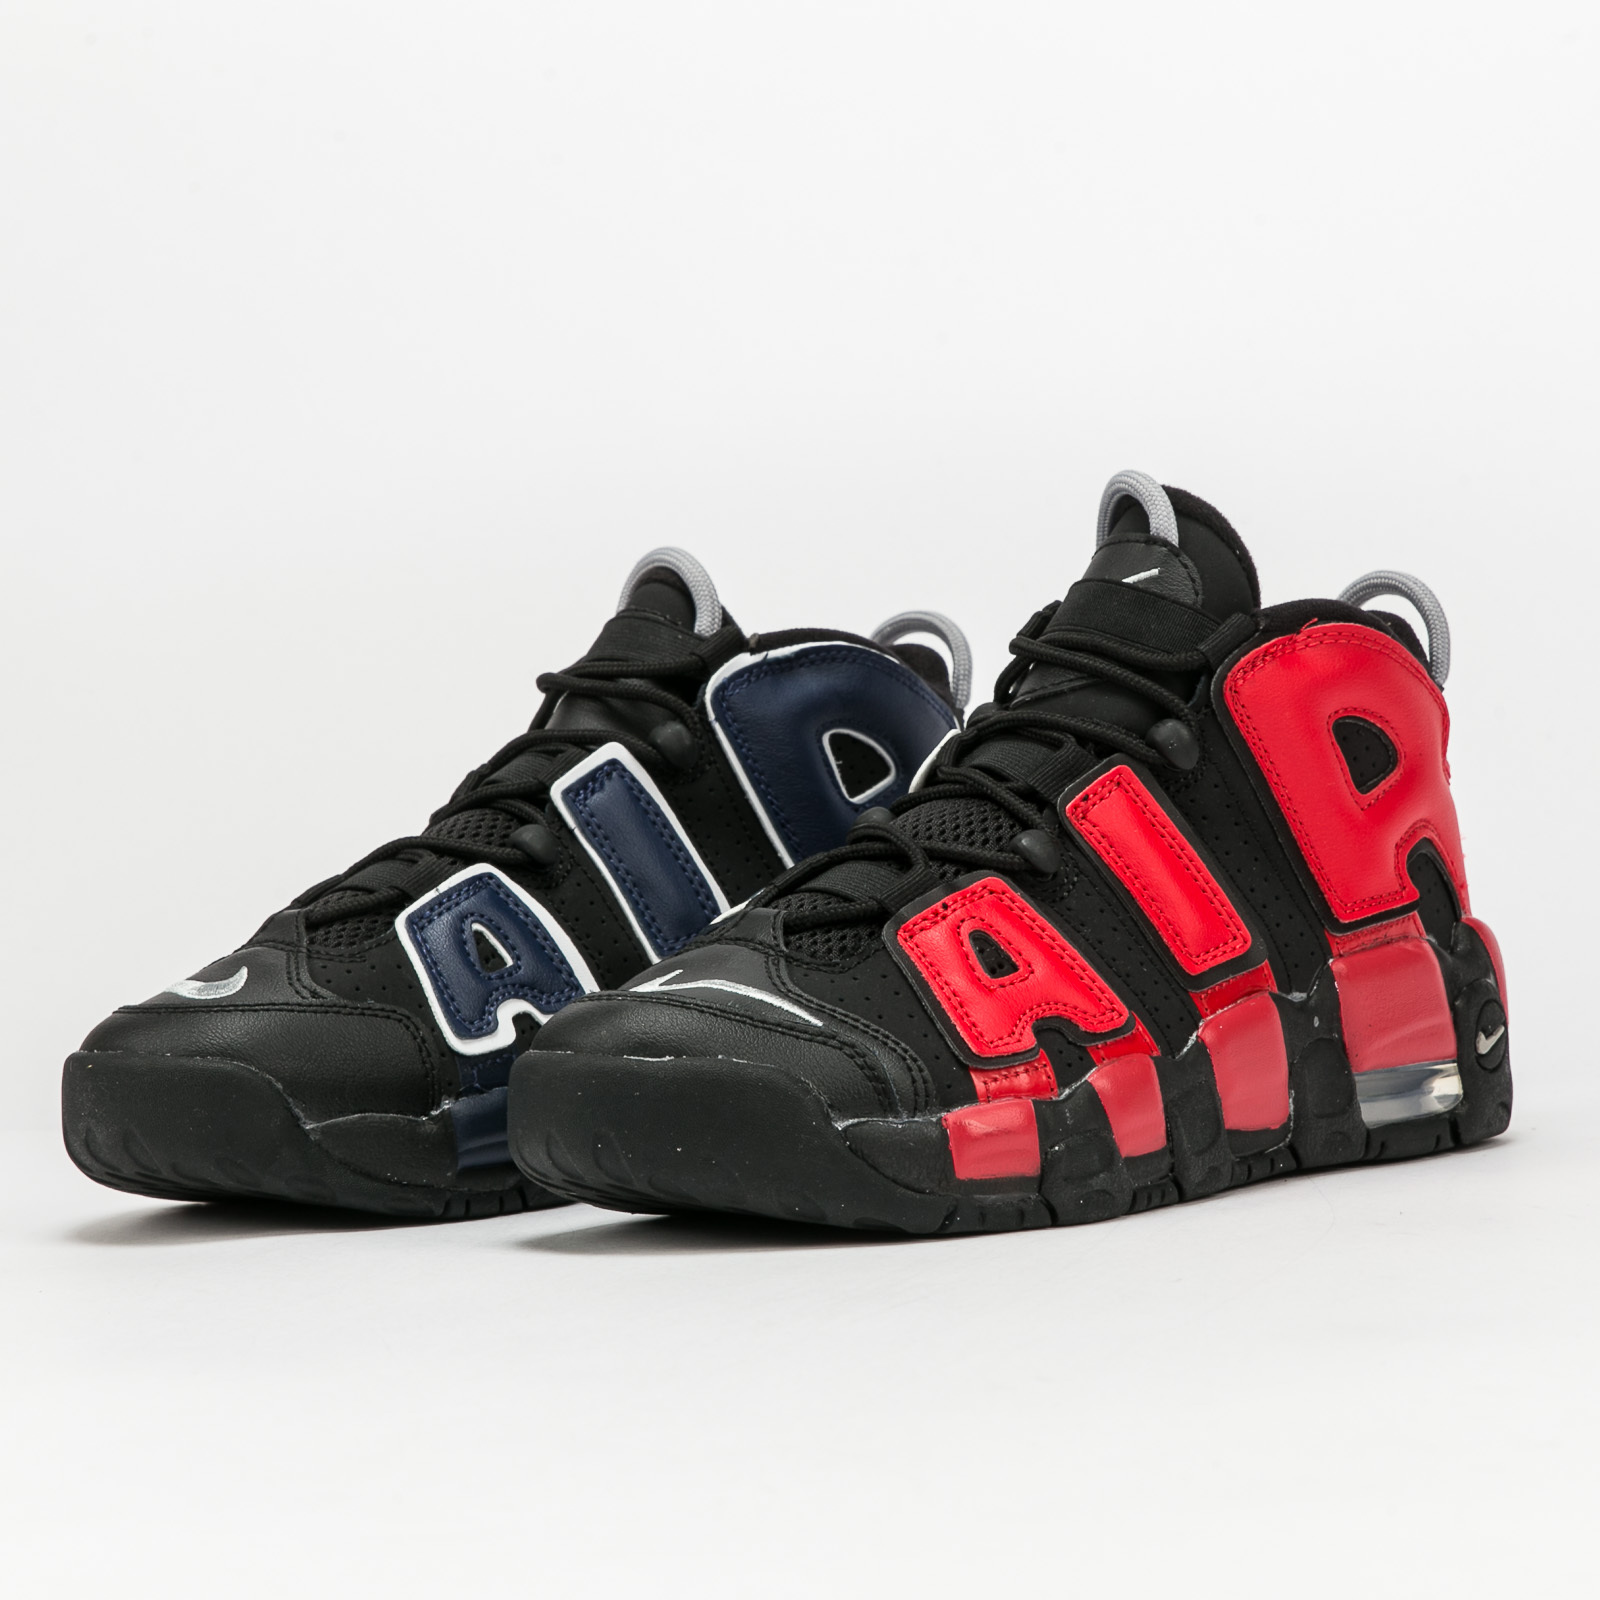 Nike Air More Uptempo (GS) black / unvred Nike